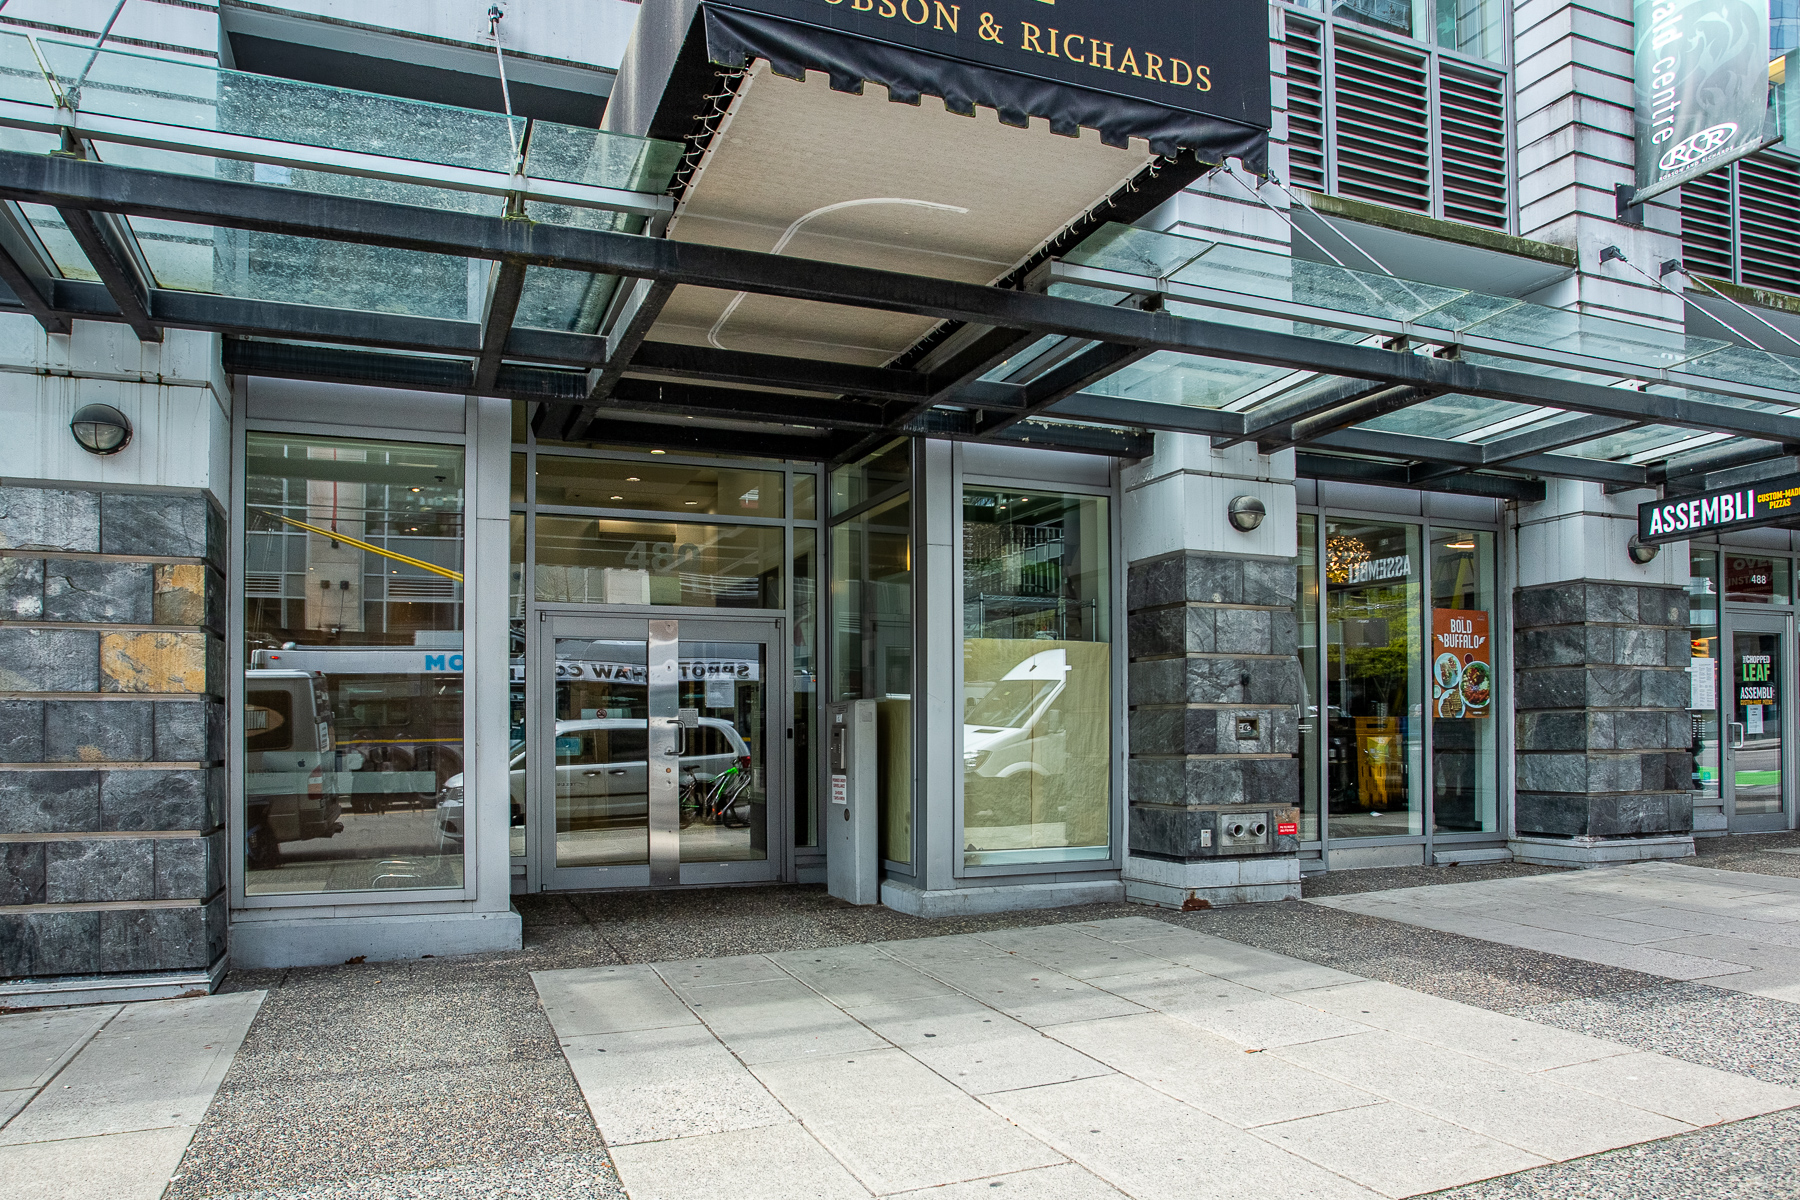 480 Robson Street - R & R, Vancouver MLS® Sold History & For Sale